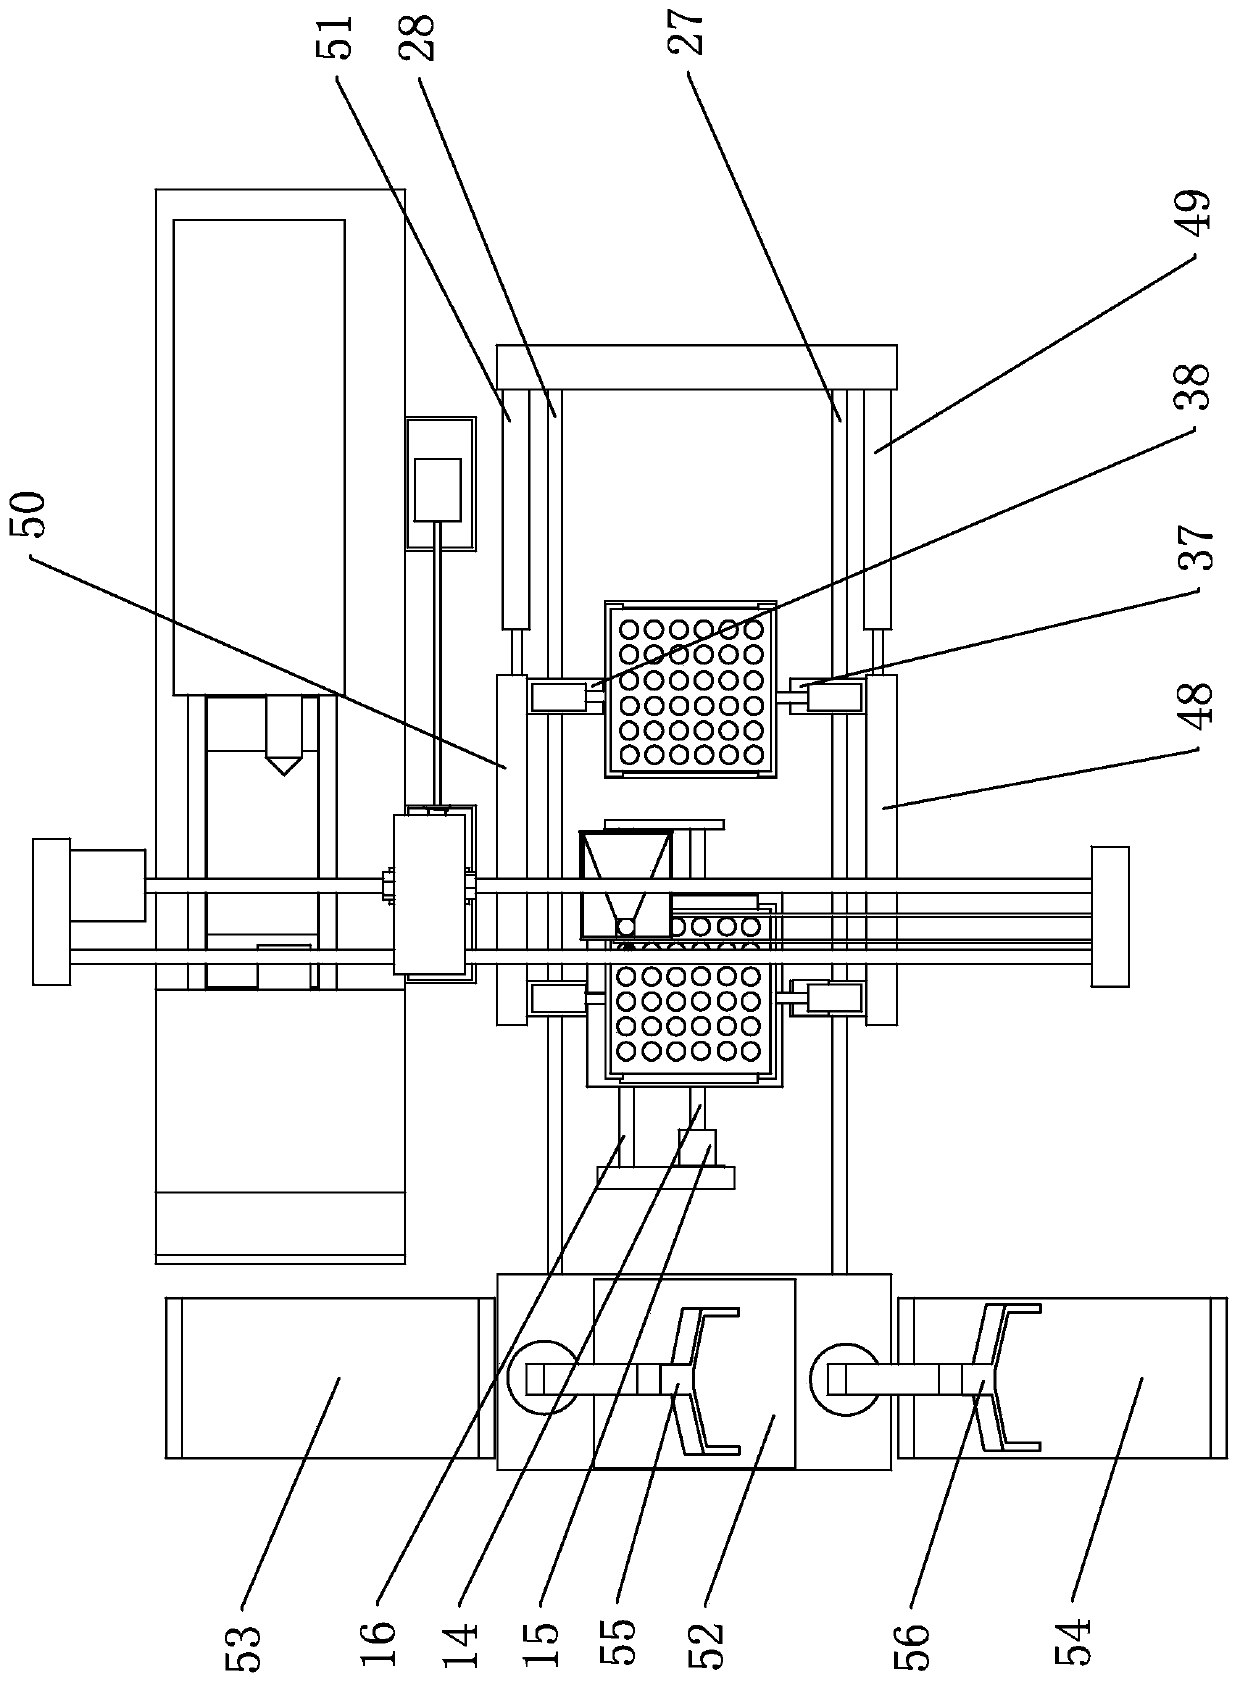 Automatic discharging mechanism used for numerically-controlled lathe